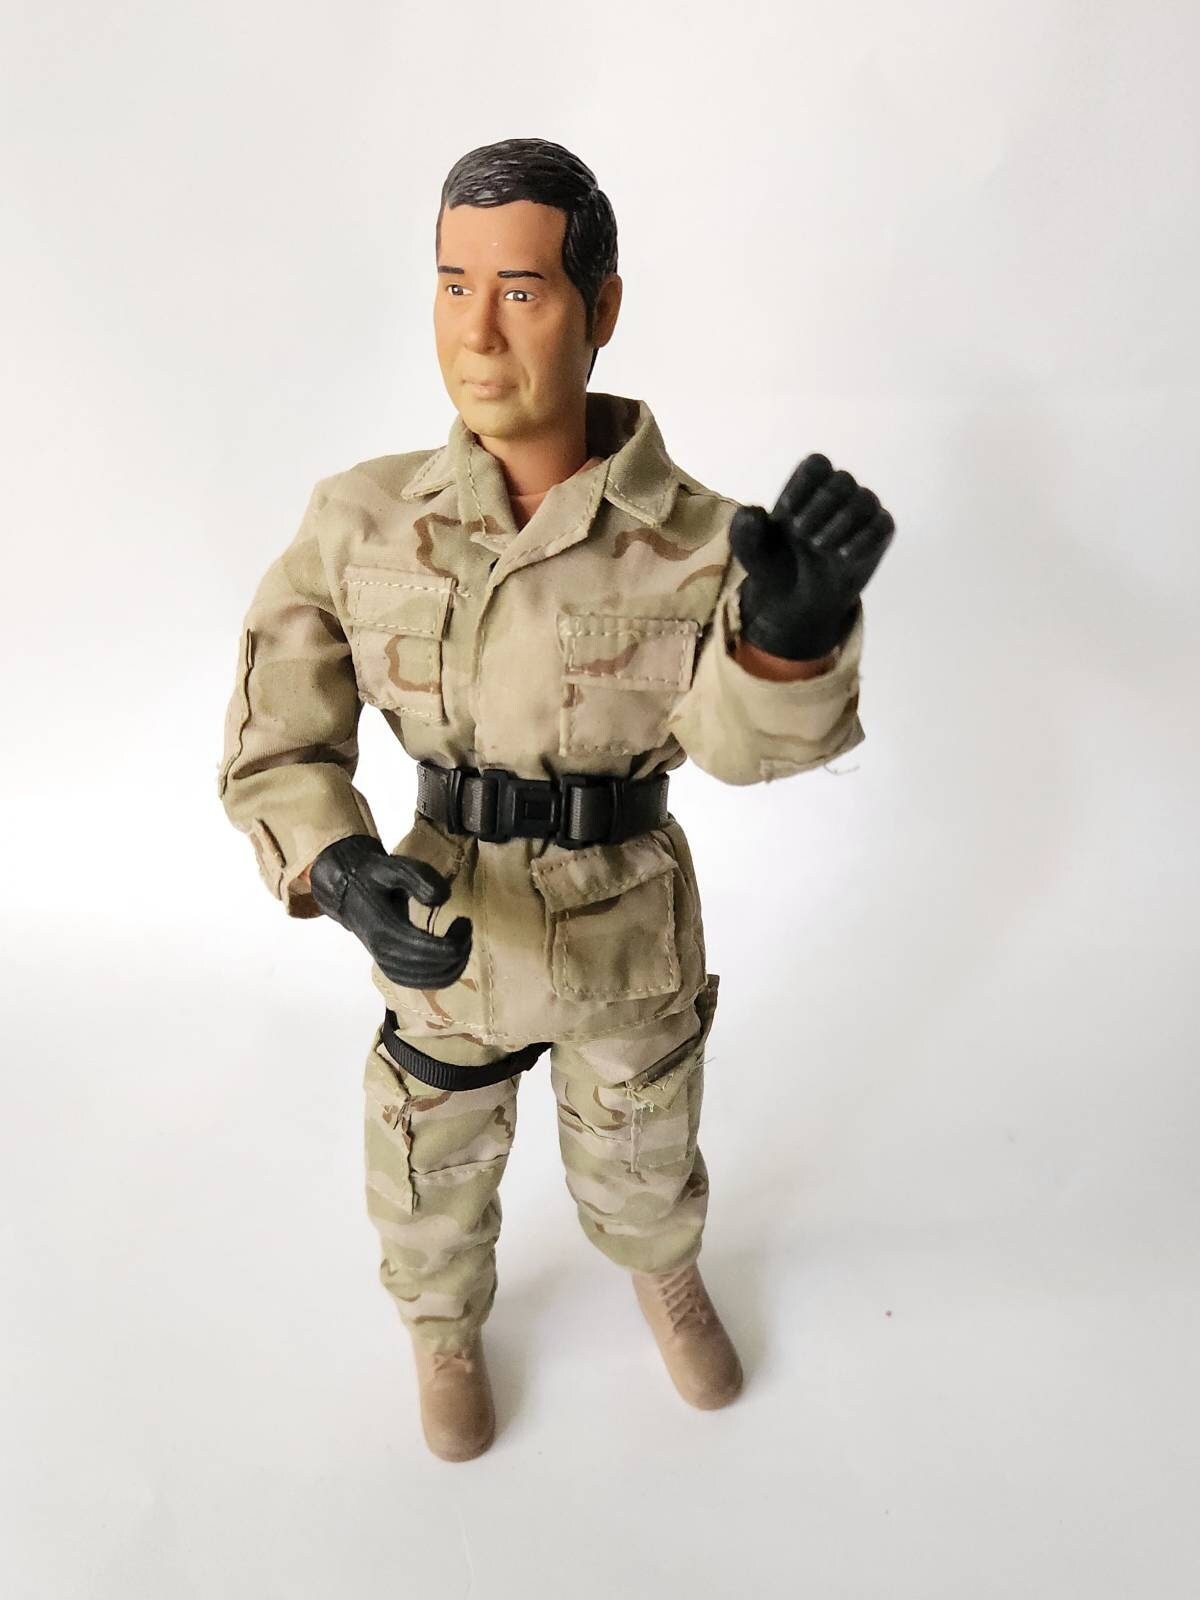 Action Figures, 12 Inch Tall, Army Soldiers, Articulated Military Action  Figure, Poseable Toy, Realistic Army Soldier, Collectible Item 